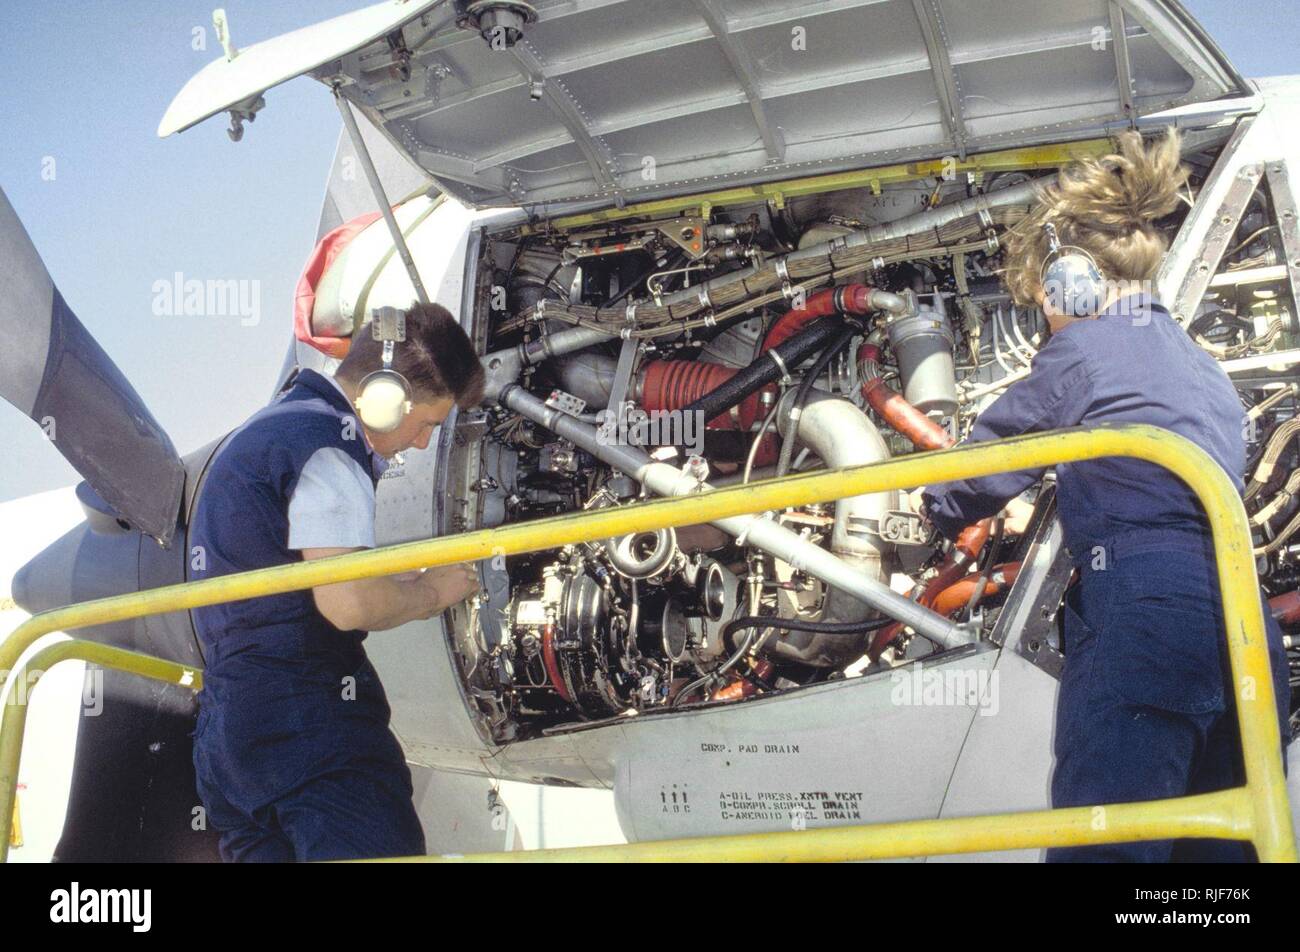 Aviation Machinist's Mate 3rd Class G. Geiger and Aviation Machinist's Mate 2nd Class Owens of Naval Air Reserve Patrol Squadron 68 (VP-68) work on the engine of a P-3B Orion aircraft.  VP-68 is in Rota for active duty training. Stock Photo